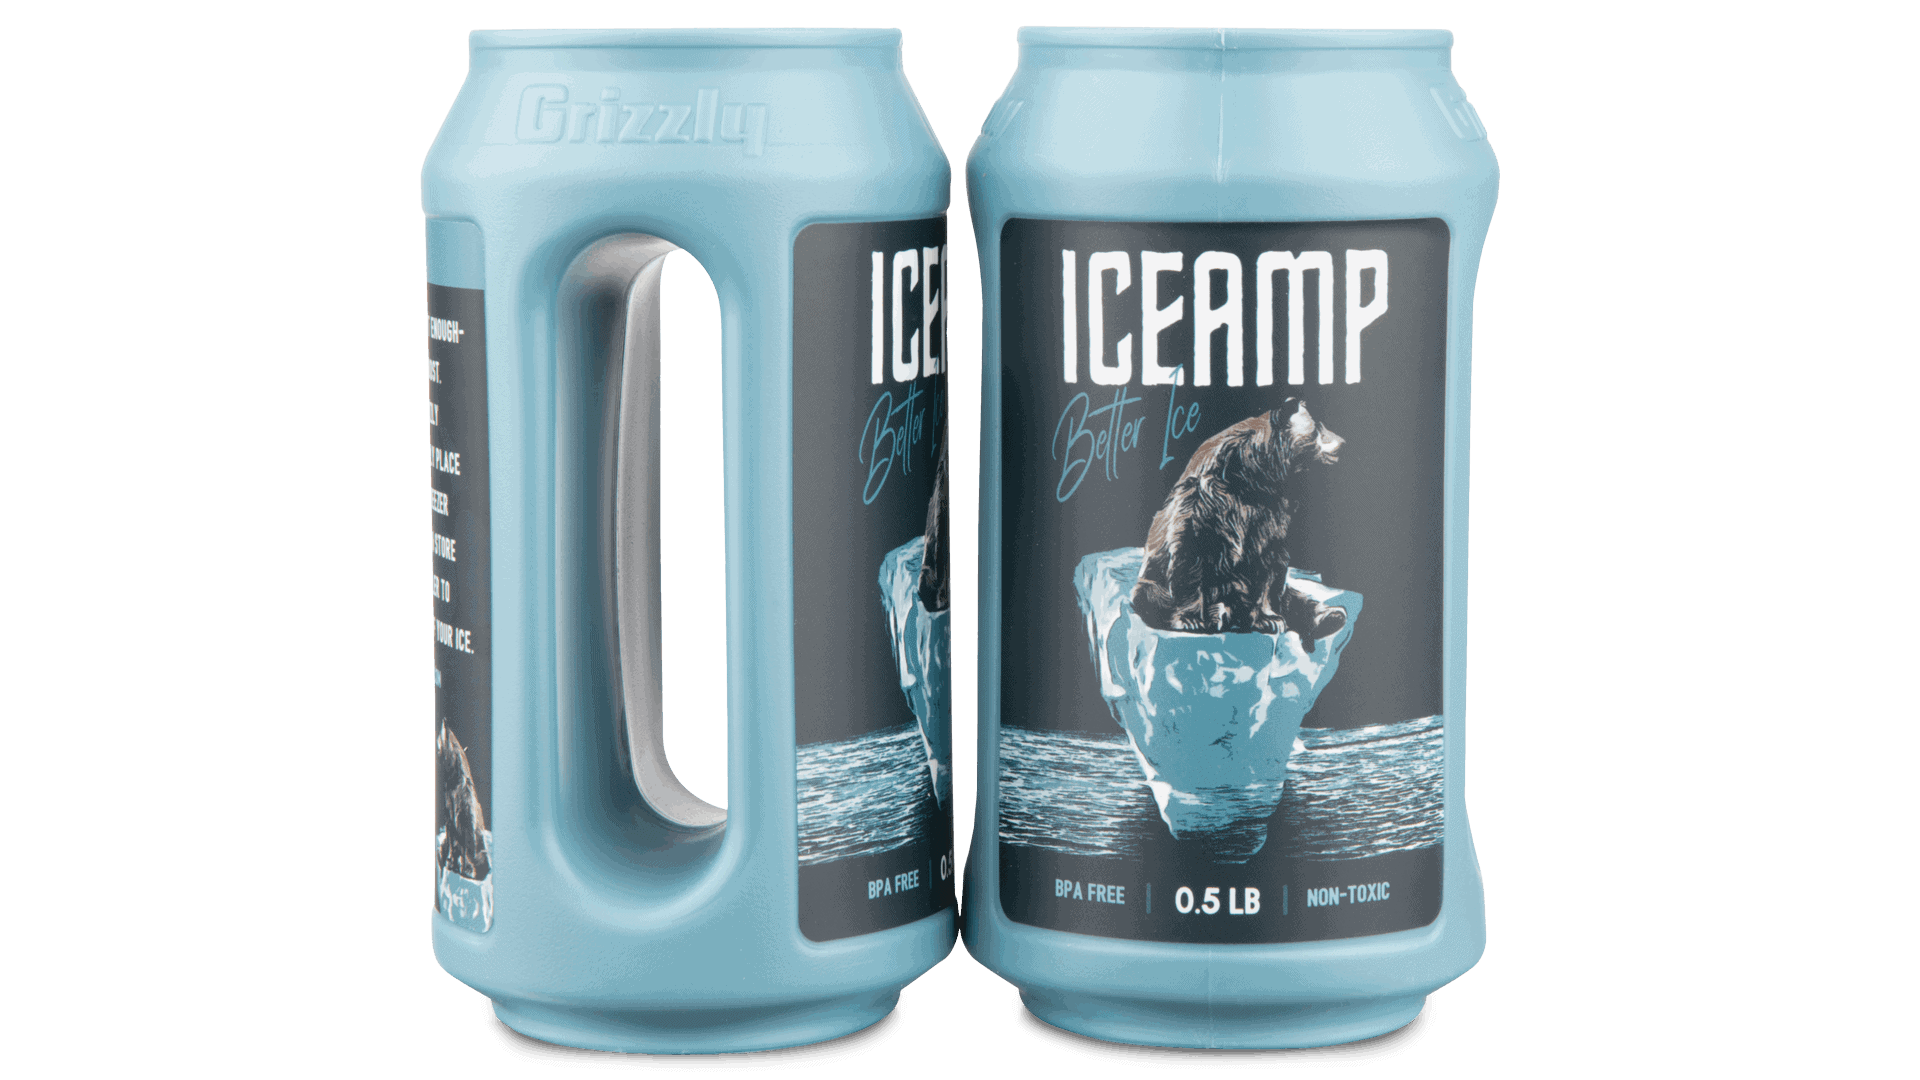 Reusable Ice packs-2 ICEAMPS one side profile and one with front label profile